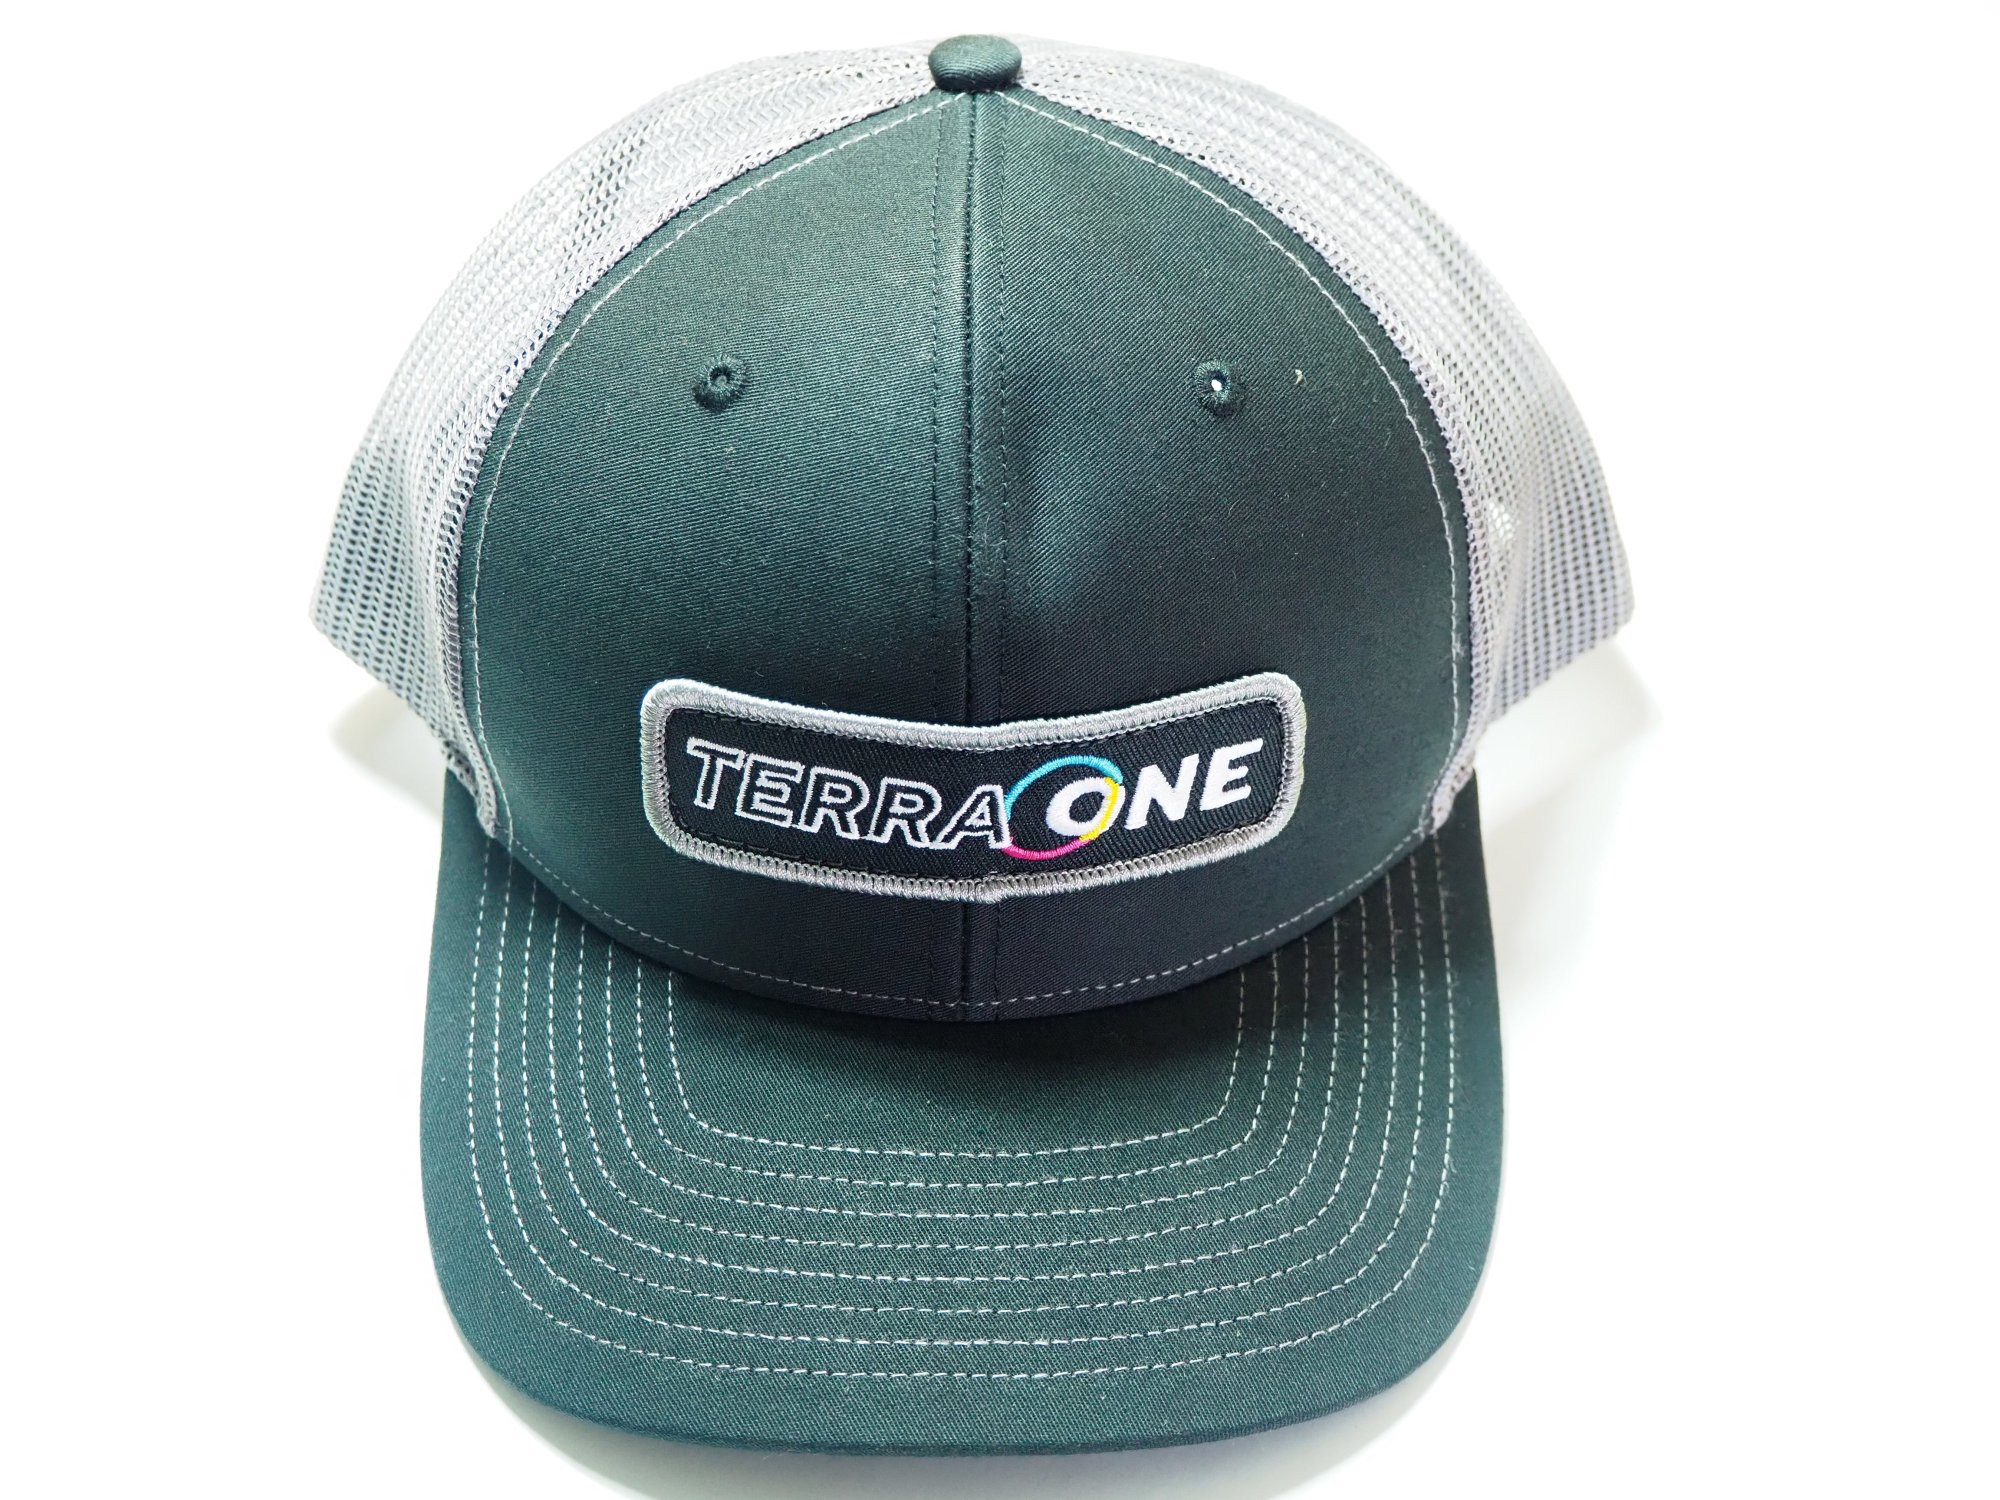 <img class='new_mark_img1' src='https://img.shop-pro.jp/img/new/icons13.gif' style='border:none;display:inline;margin:0px;padding:0px;width:auto;' />TERRA ONE TRUCKER HAT